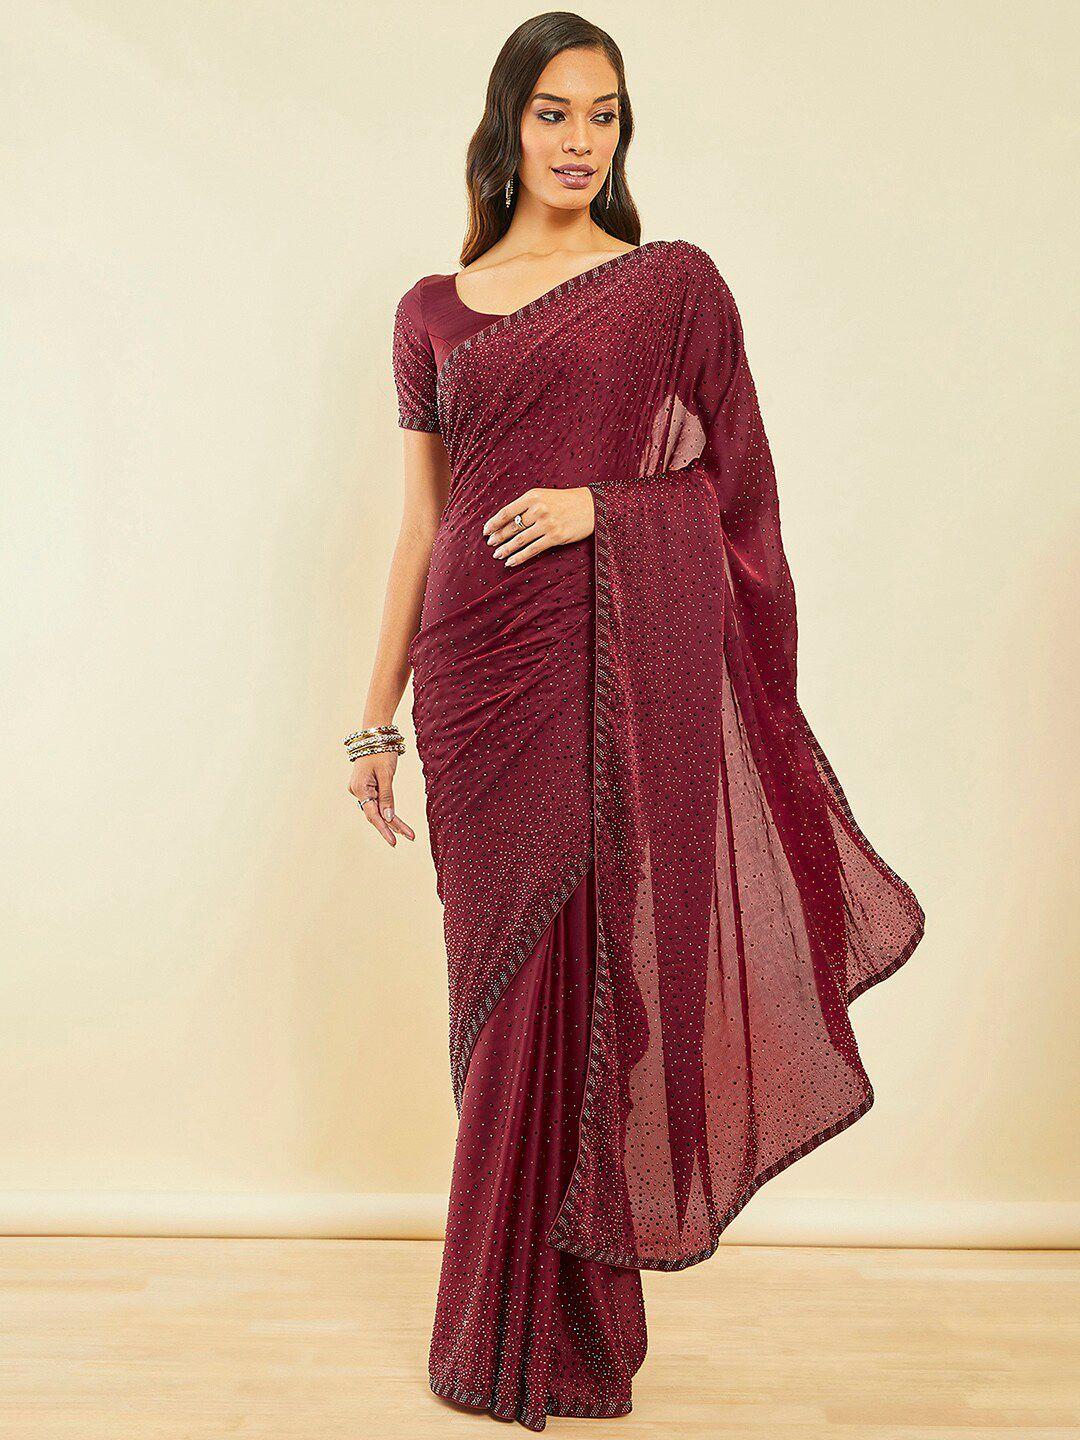 soch-maroon-&-black-embellished-beads-and-stones-saree